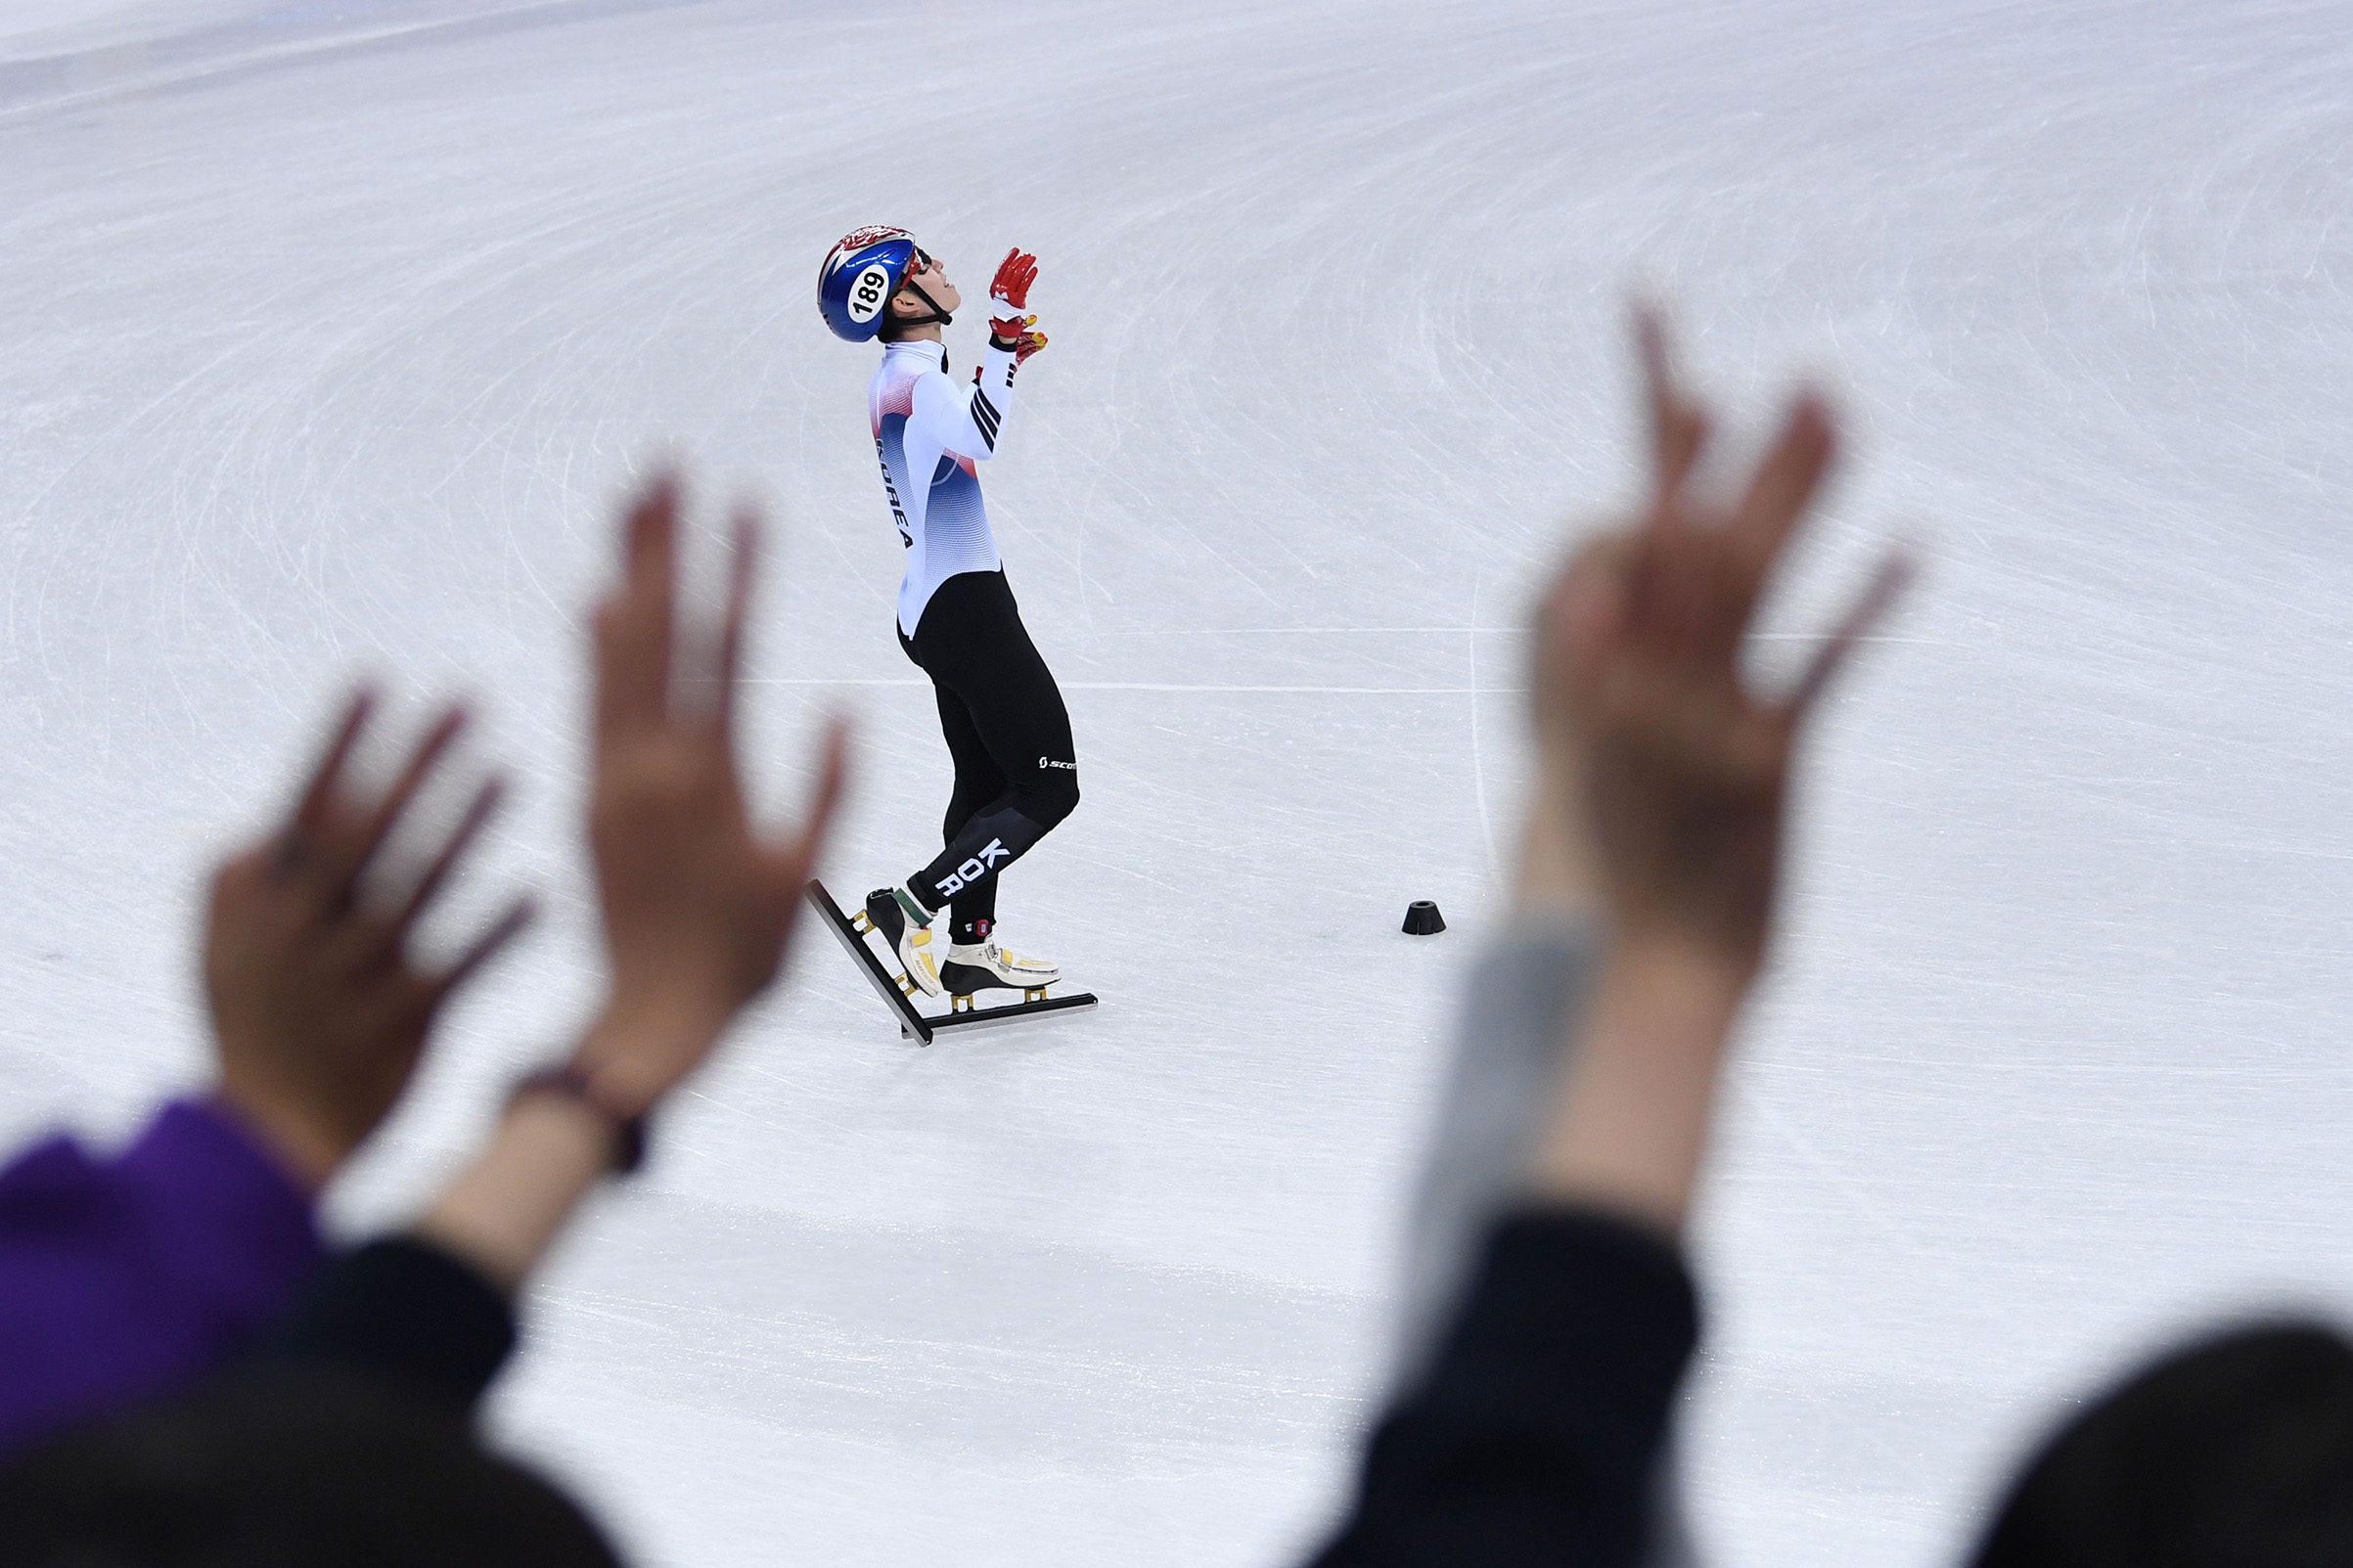 South Korea's Lim Hyojun celebrates after the men's 5,000m relay short track speed skating heat event on Feb. 13, 2018. (Roberto Schmidt—AFP/Getty Images:)